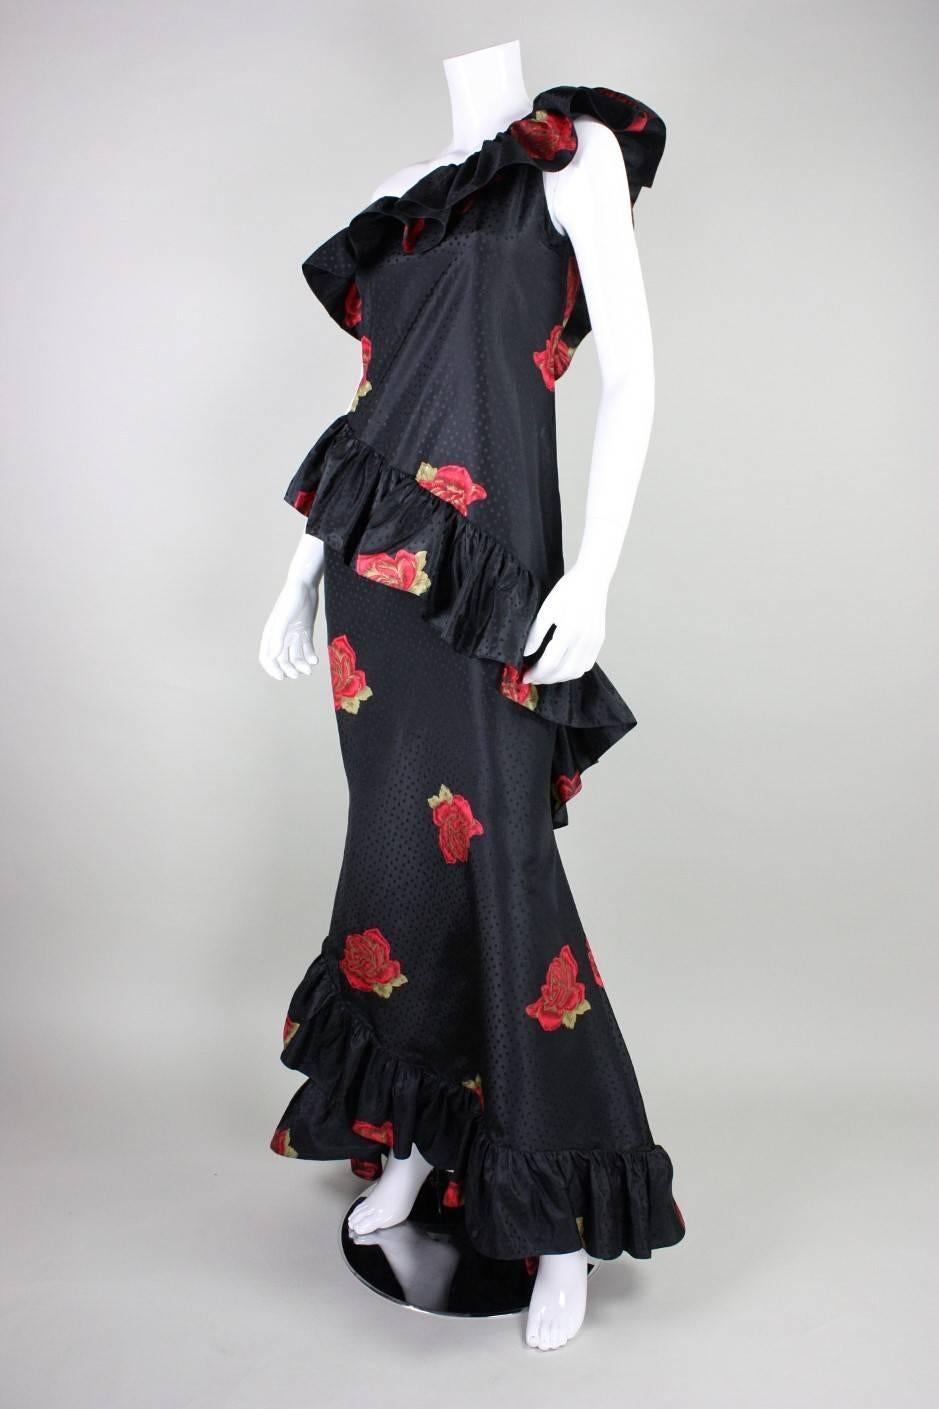 Vintage gown likely dates to the 1980's and is made of black silk with a floral print.  Wide ruffles encircle the gown and trim along the bust and hemline.  Gown is 5